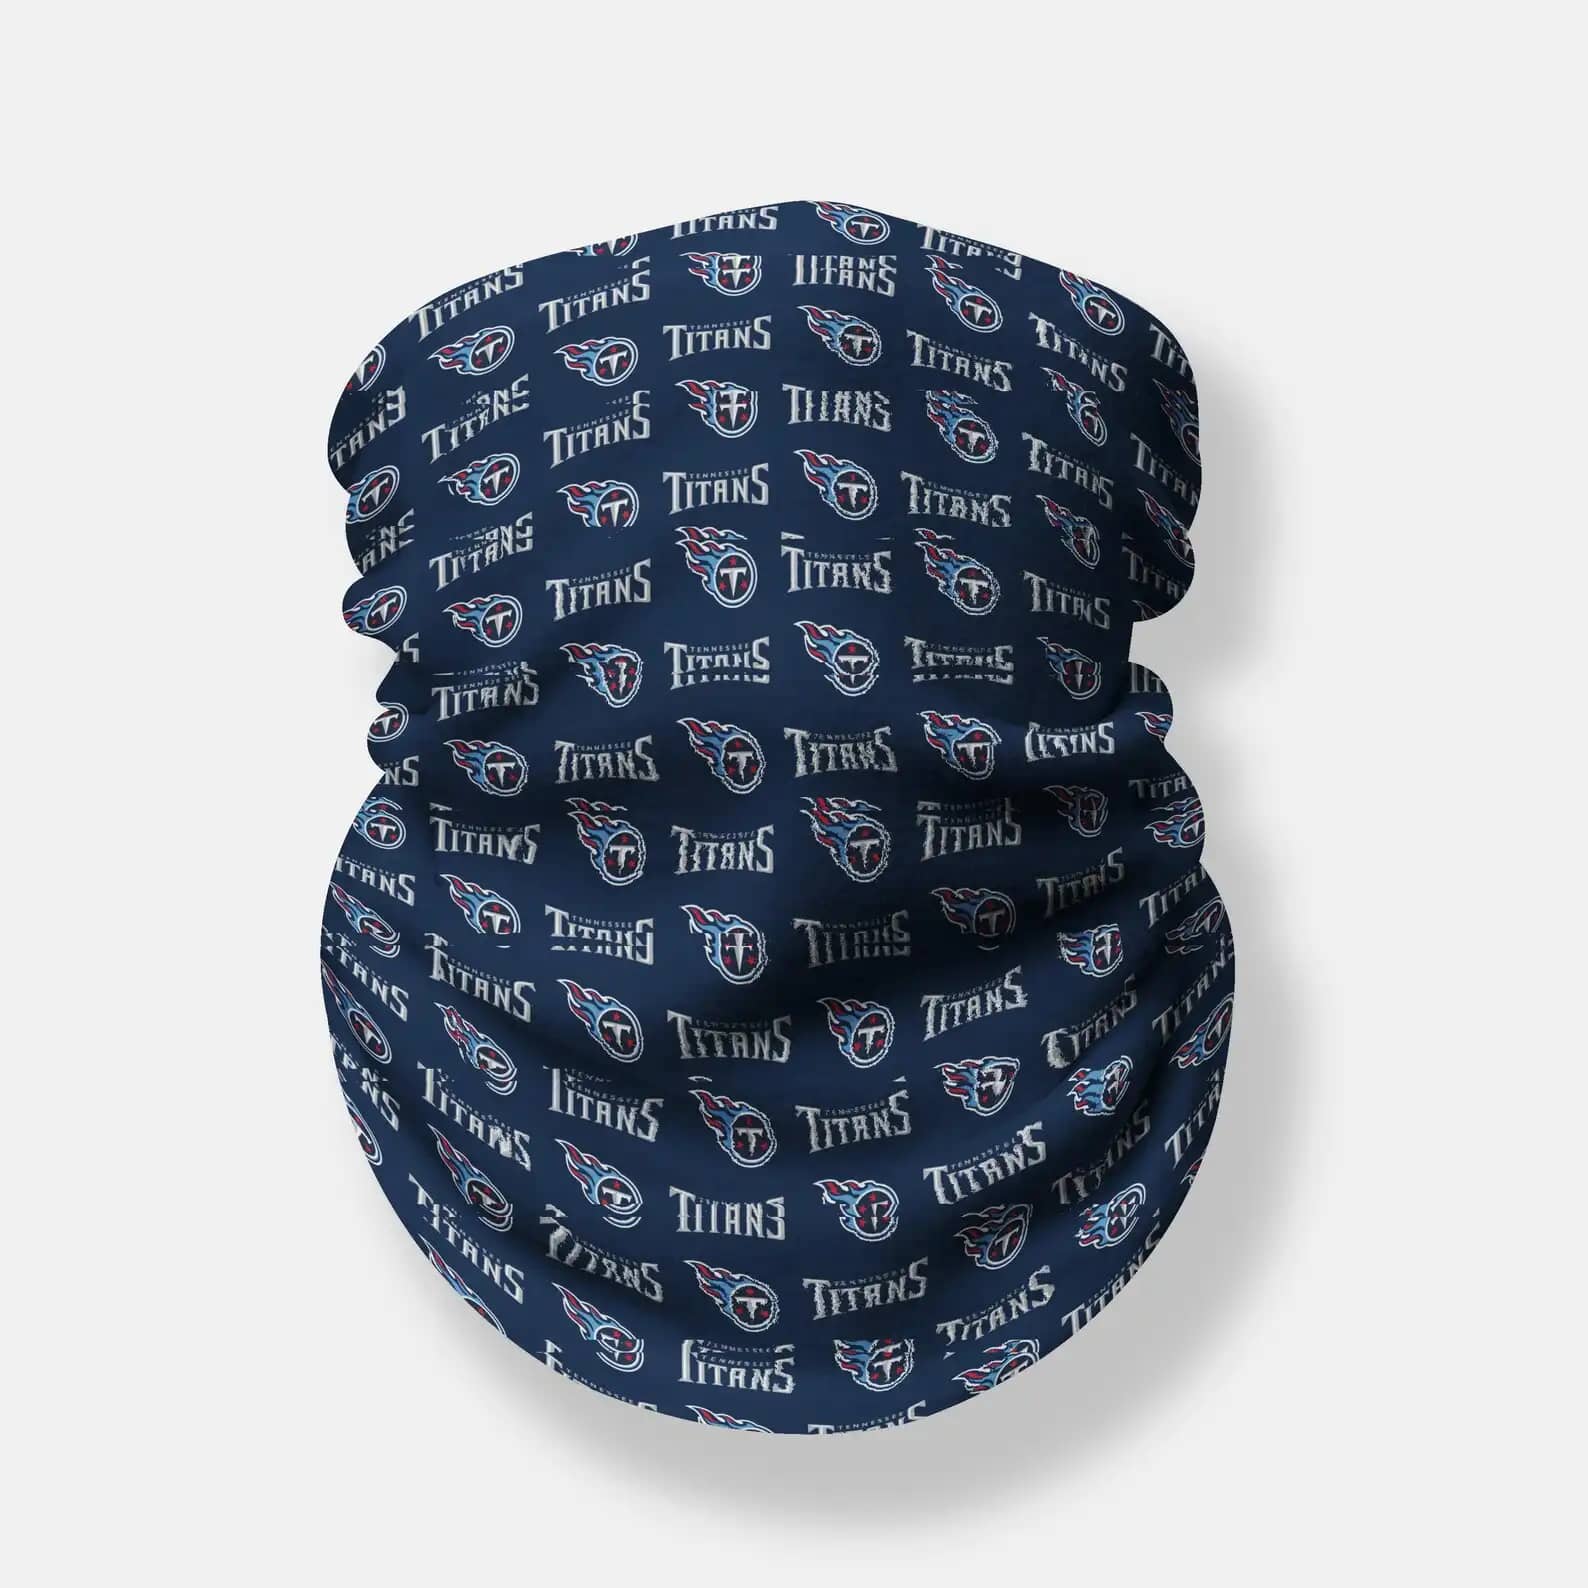 Nfl Tennessee Titans Fan Gifts Neck Gaiter